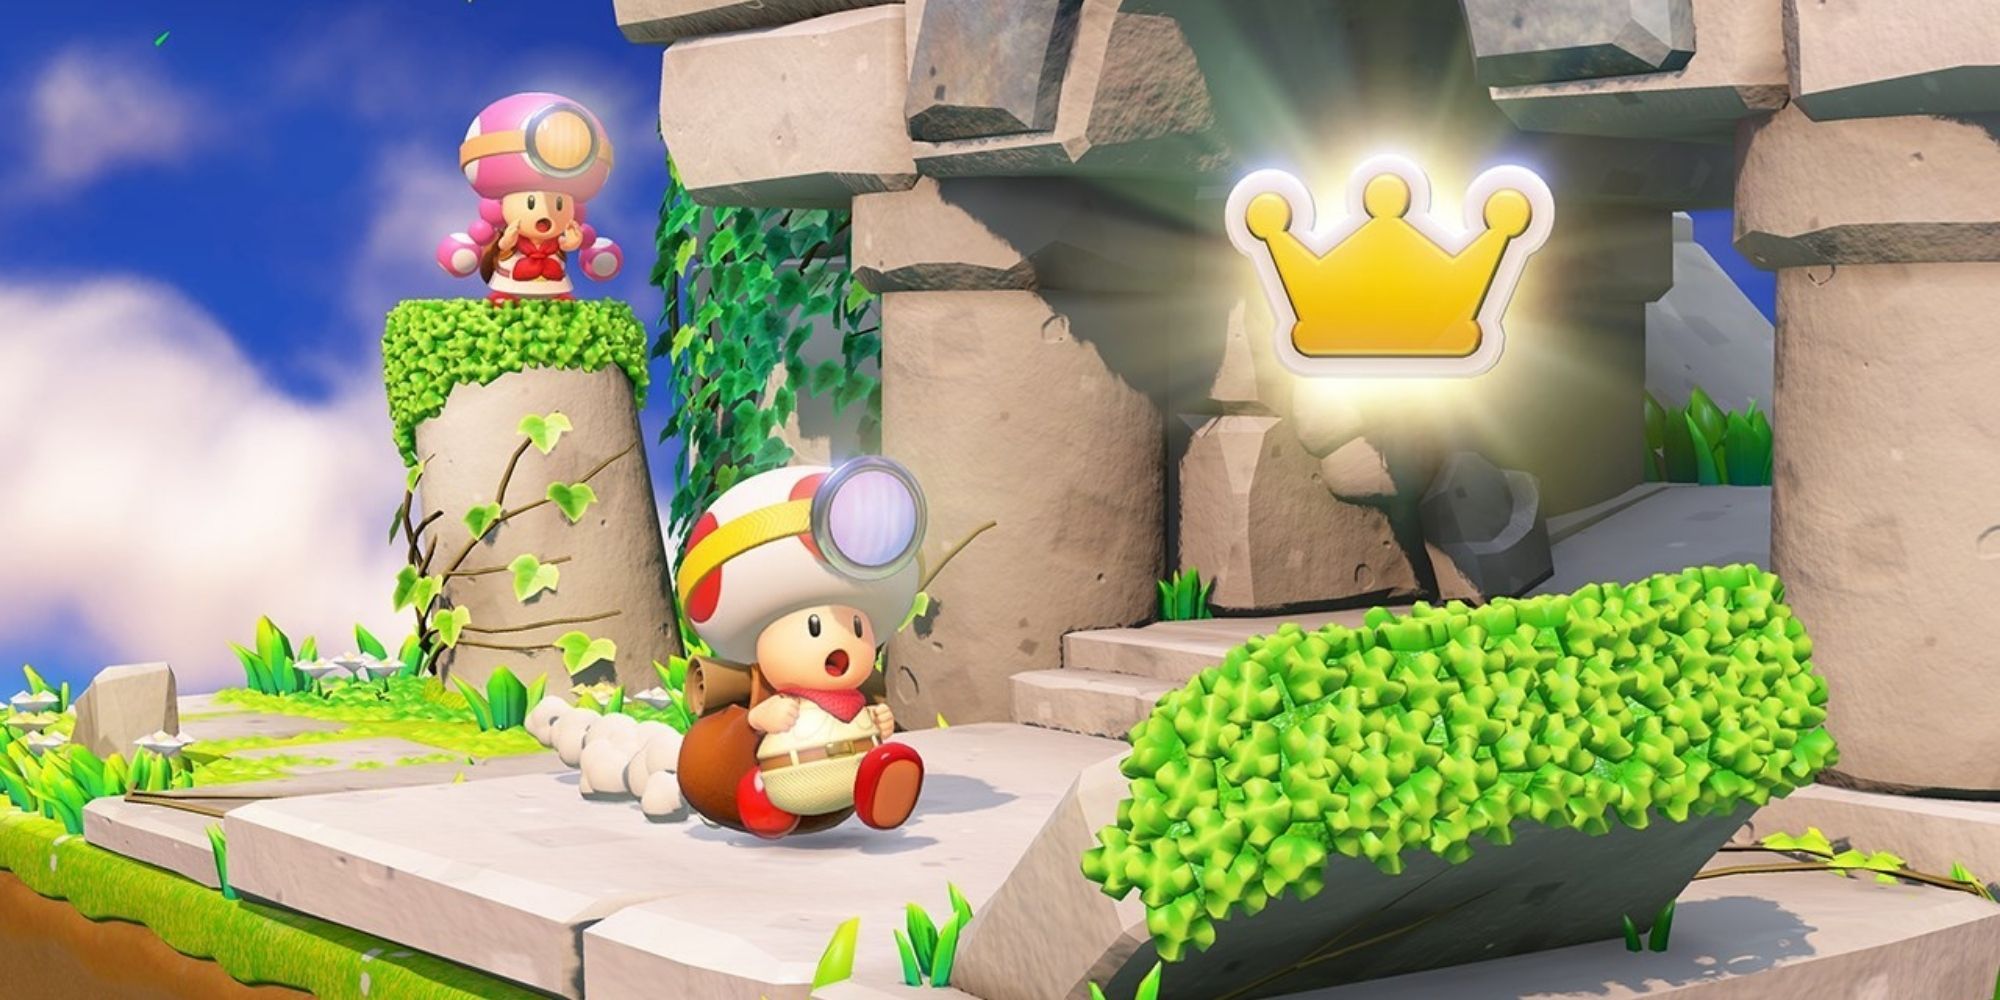 Toadette watches over Captain Toad as he heads toward treasure 